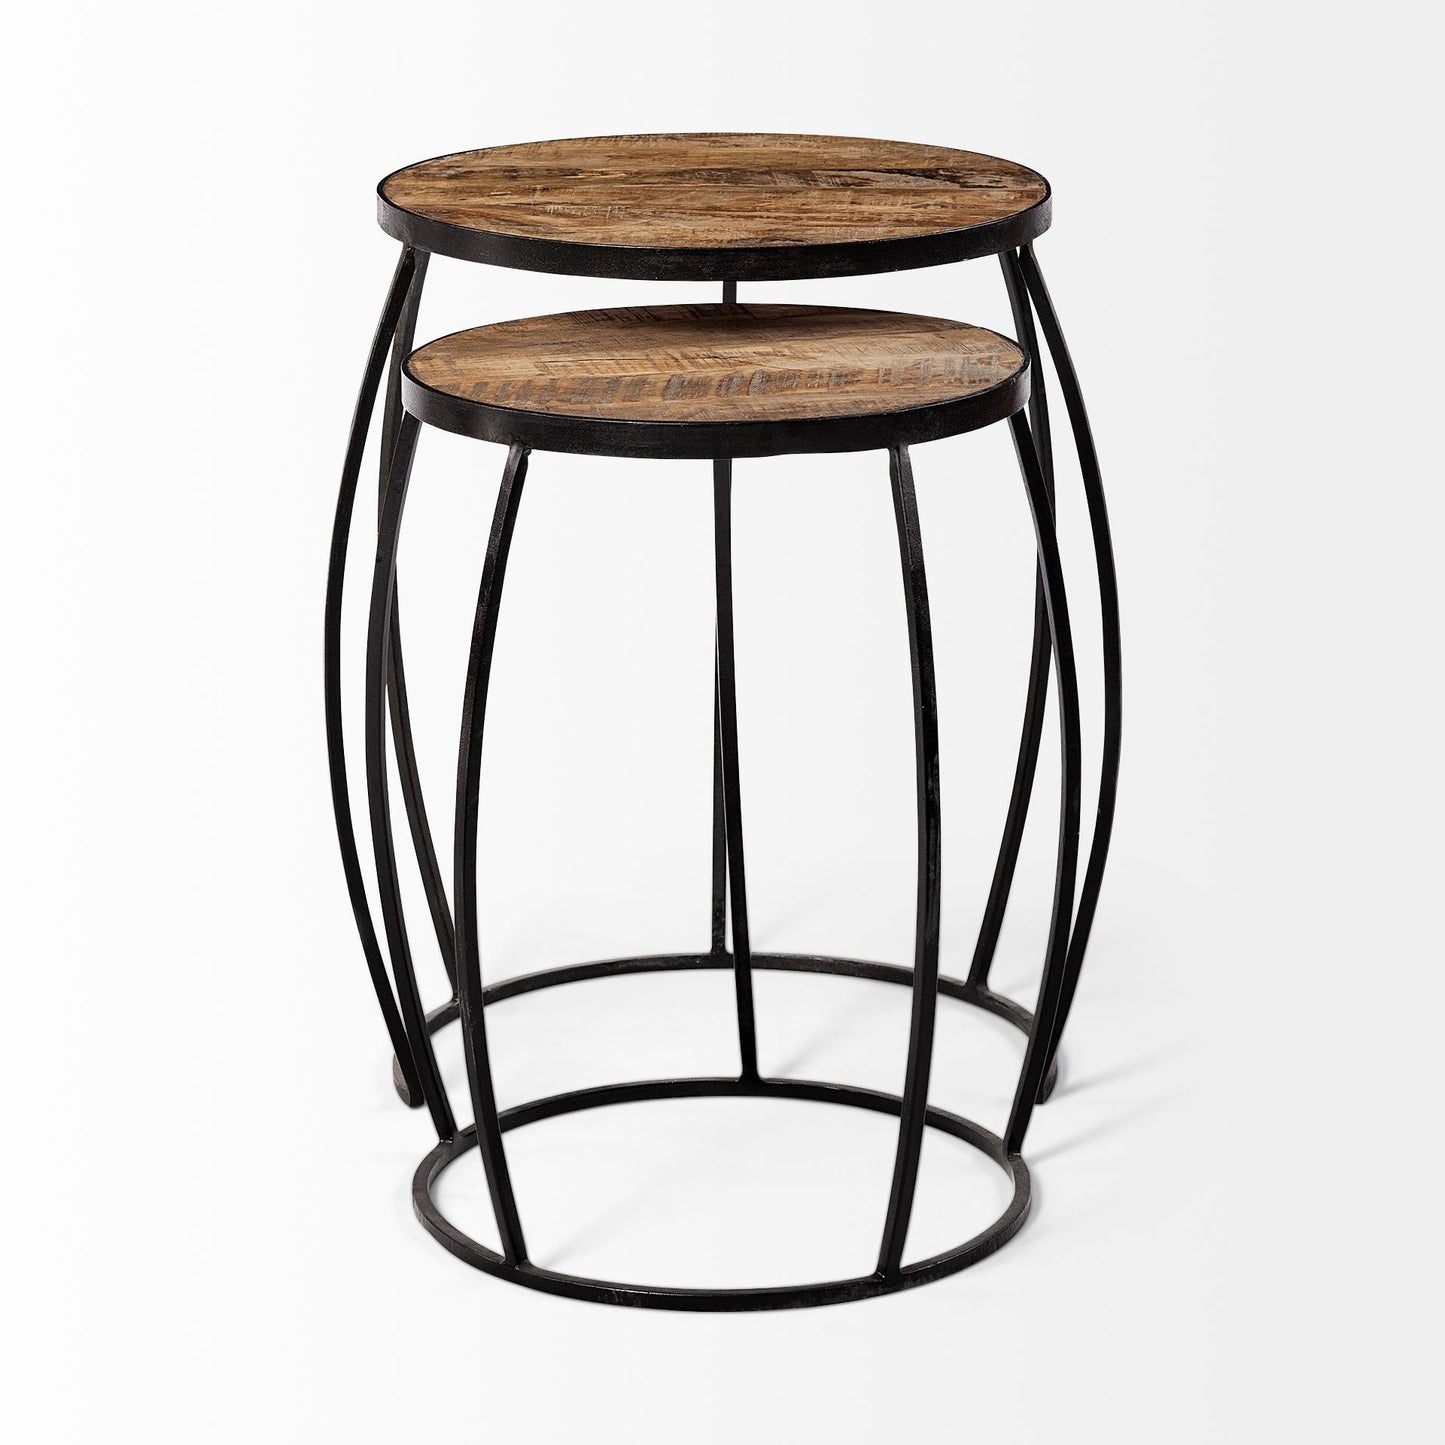 Clapp IV (Set of 2) 20L x 20W Brown Round Wood Top W/ Black Iron Frame Nesting Accent Tables